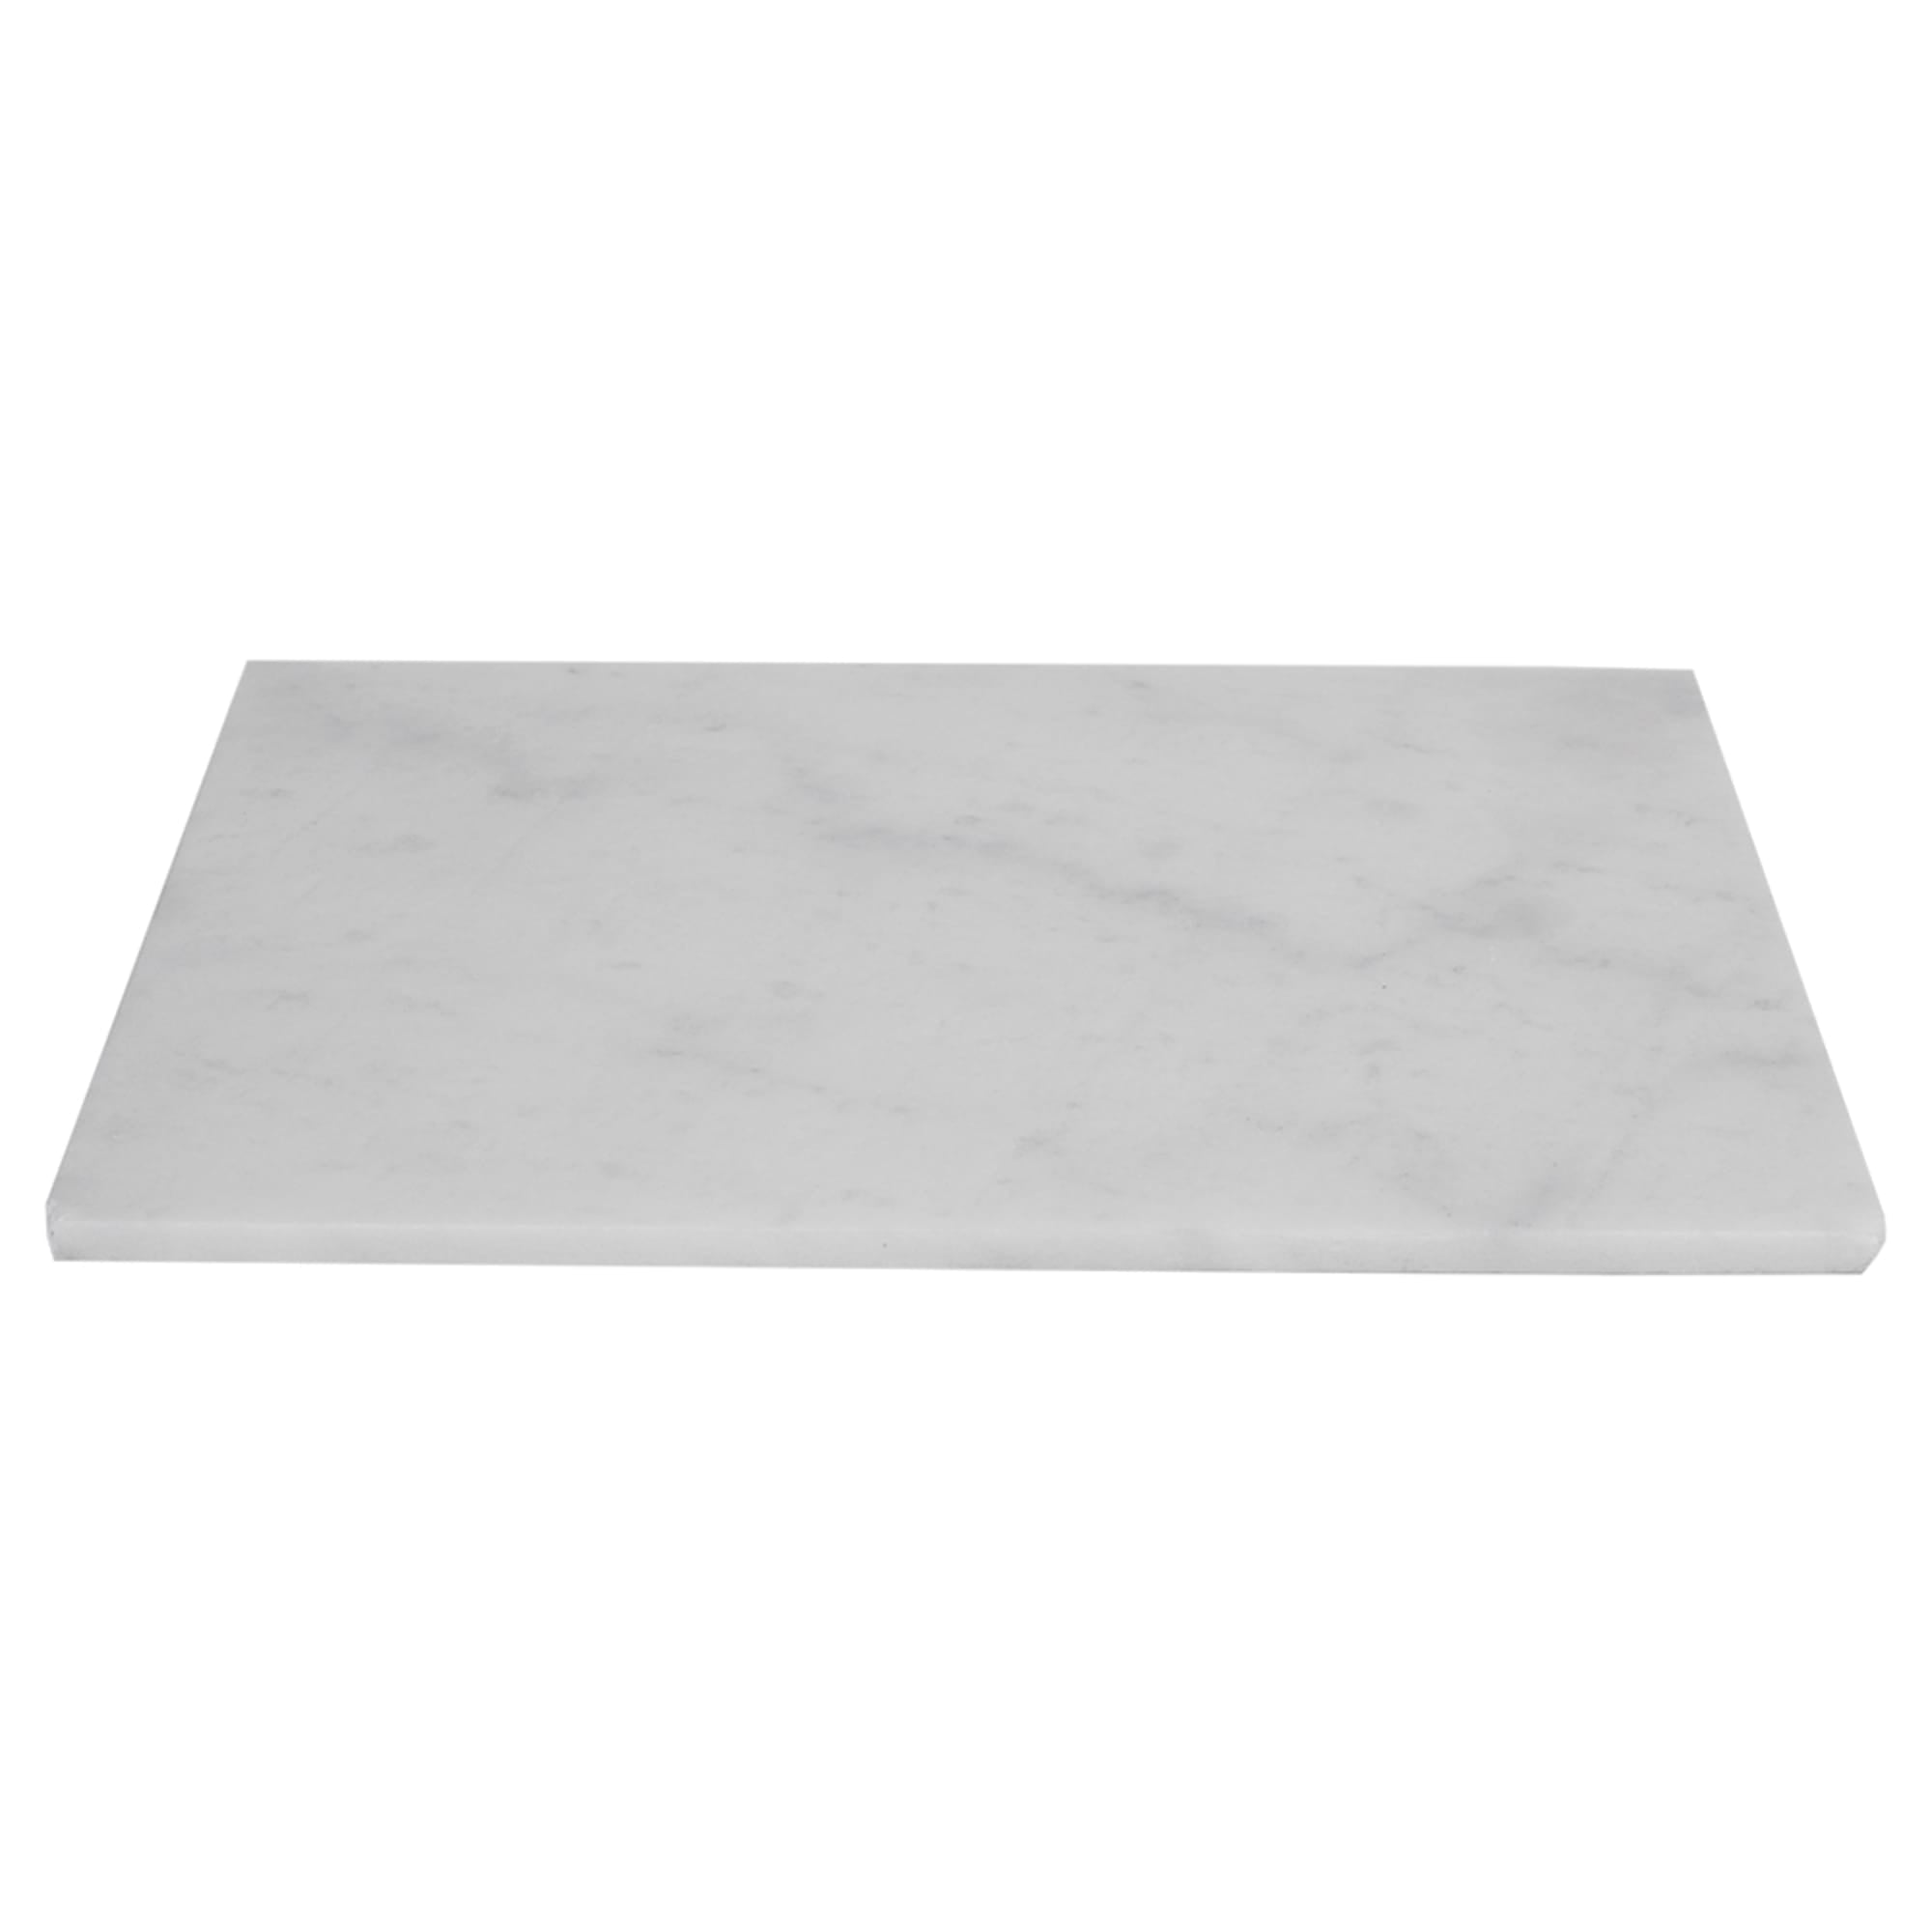 Home Basics 12 x 16 Marble Cutting Board, White, TABLETOP